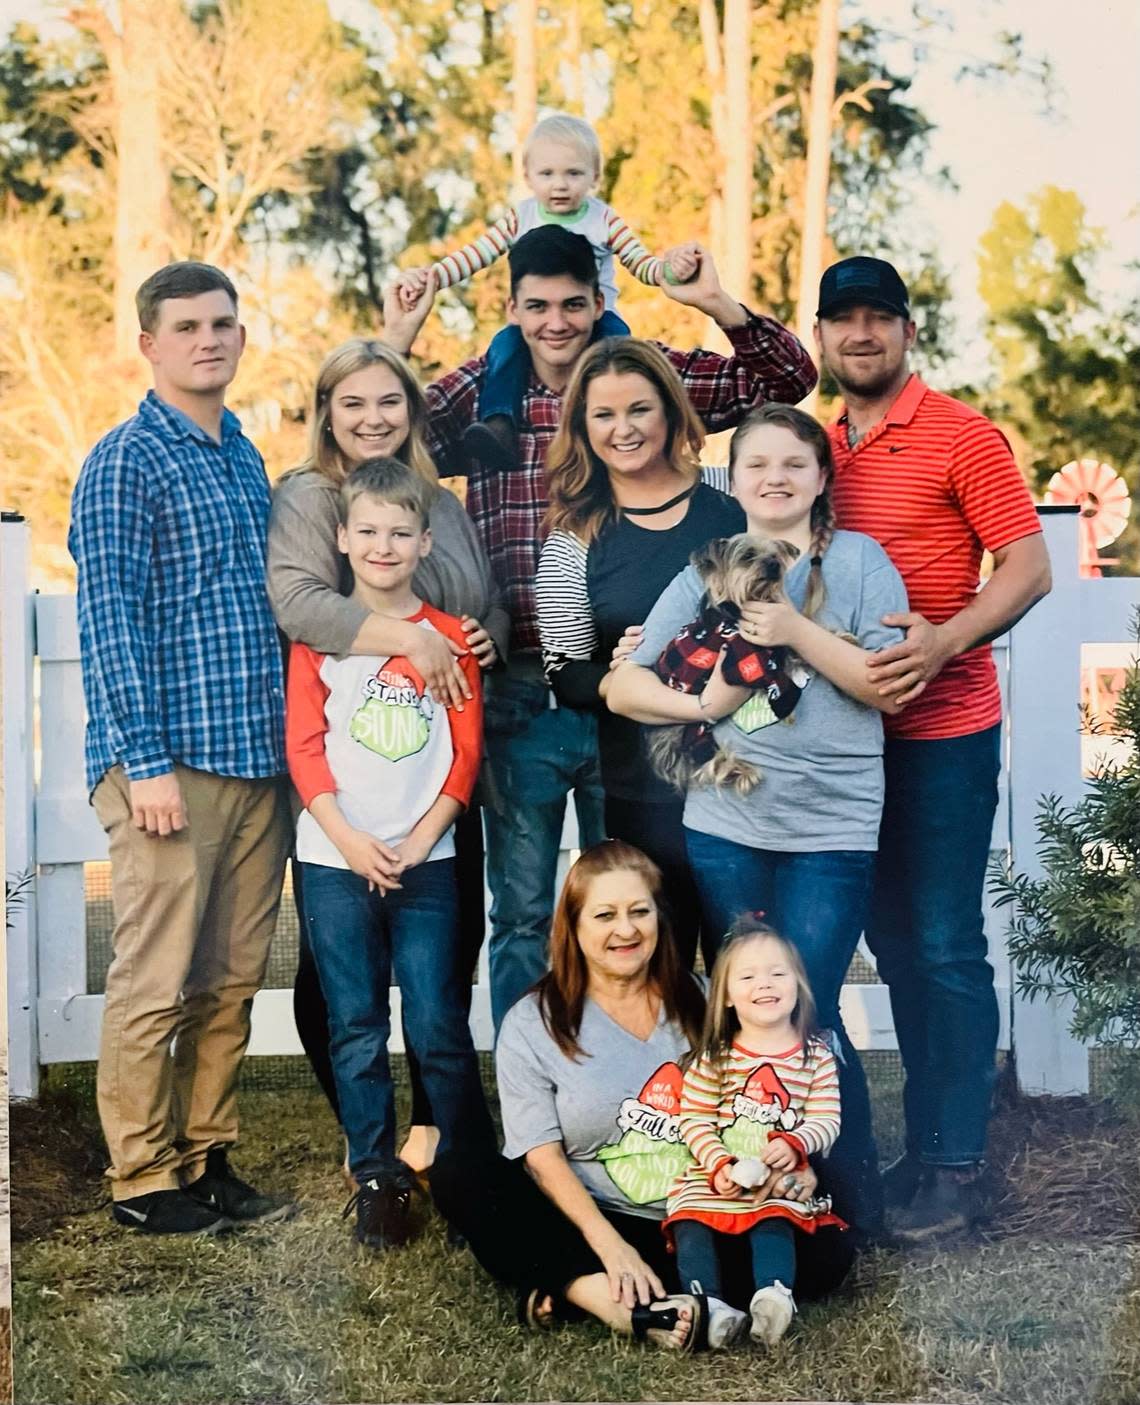 Brandon Cox, far right, Kelly Mabie, center blue shirt, are pictured here with their blended family. The couple, with plans to wed in March, are opening an Another Broken Egg Cafe franchise in Warner Robins along with business partners Ian Payne and Raymond Kimsey (not pictured) of Premier Contracting Solutions,